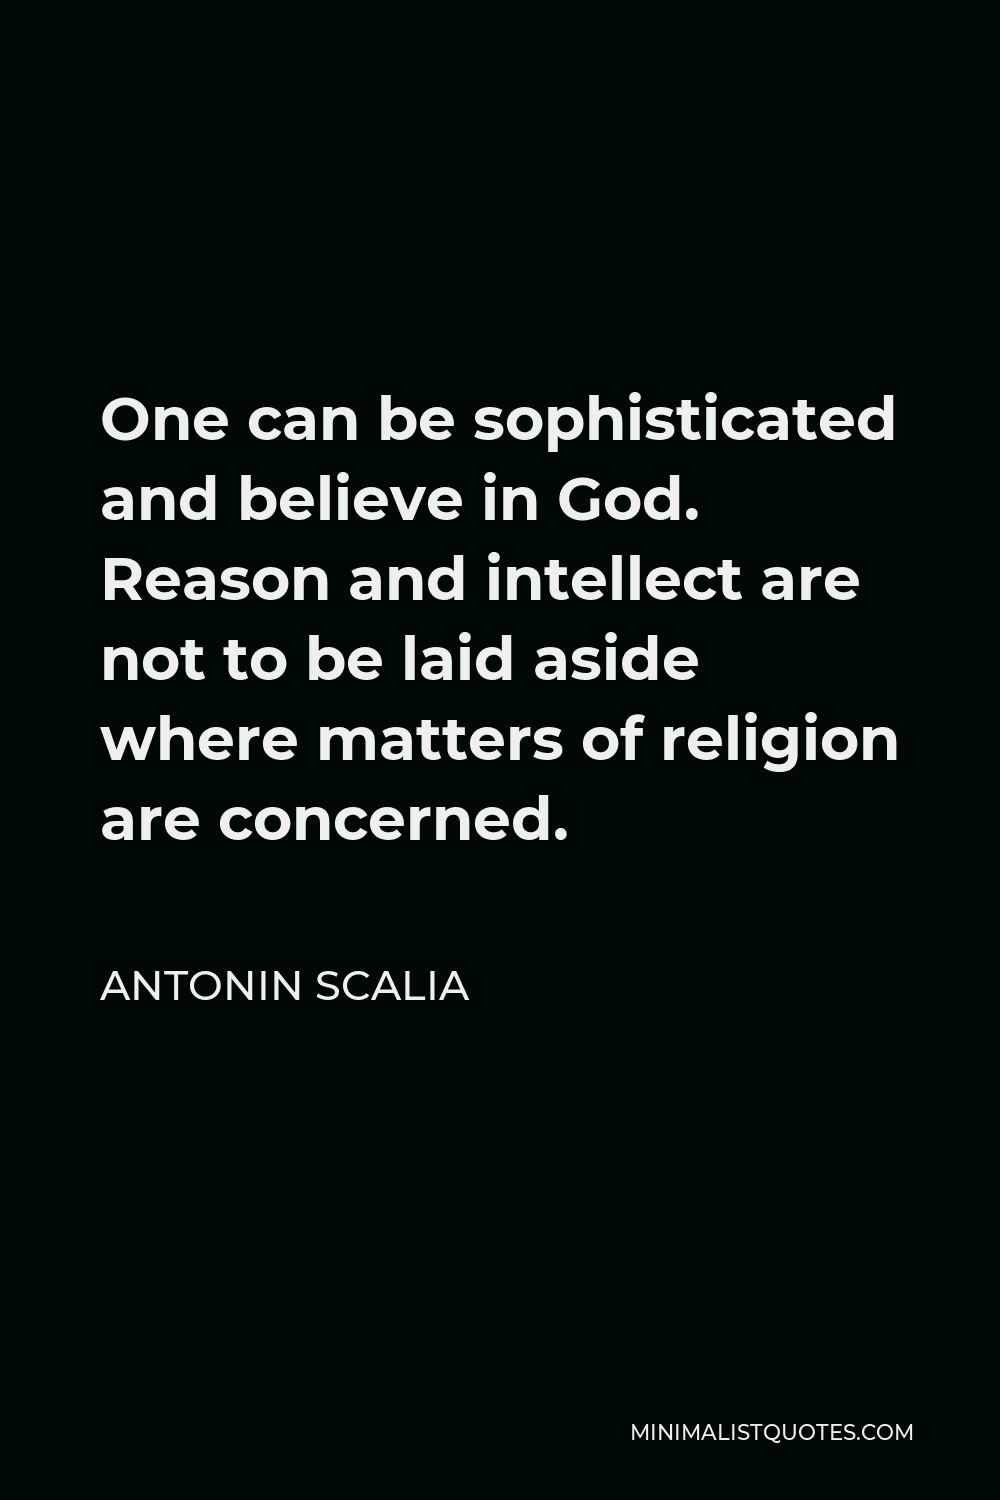 Antonin Scalia Quote - One can be sophisticated and believe in God. Reason and intellect are not to be laid aside where matters of religion are concerned.